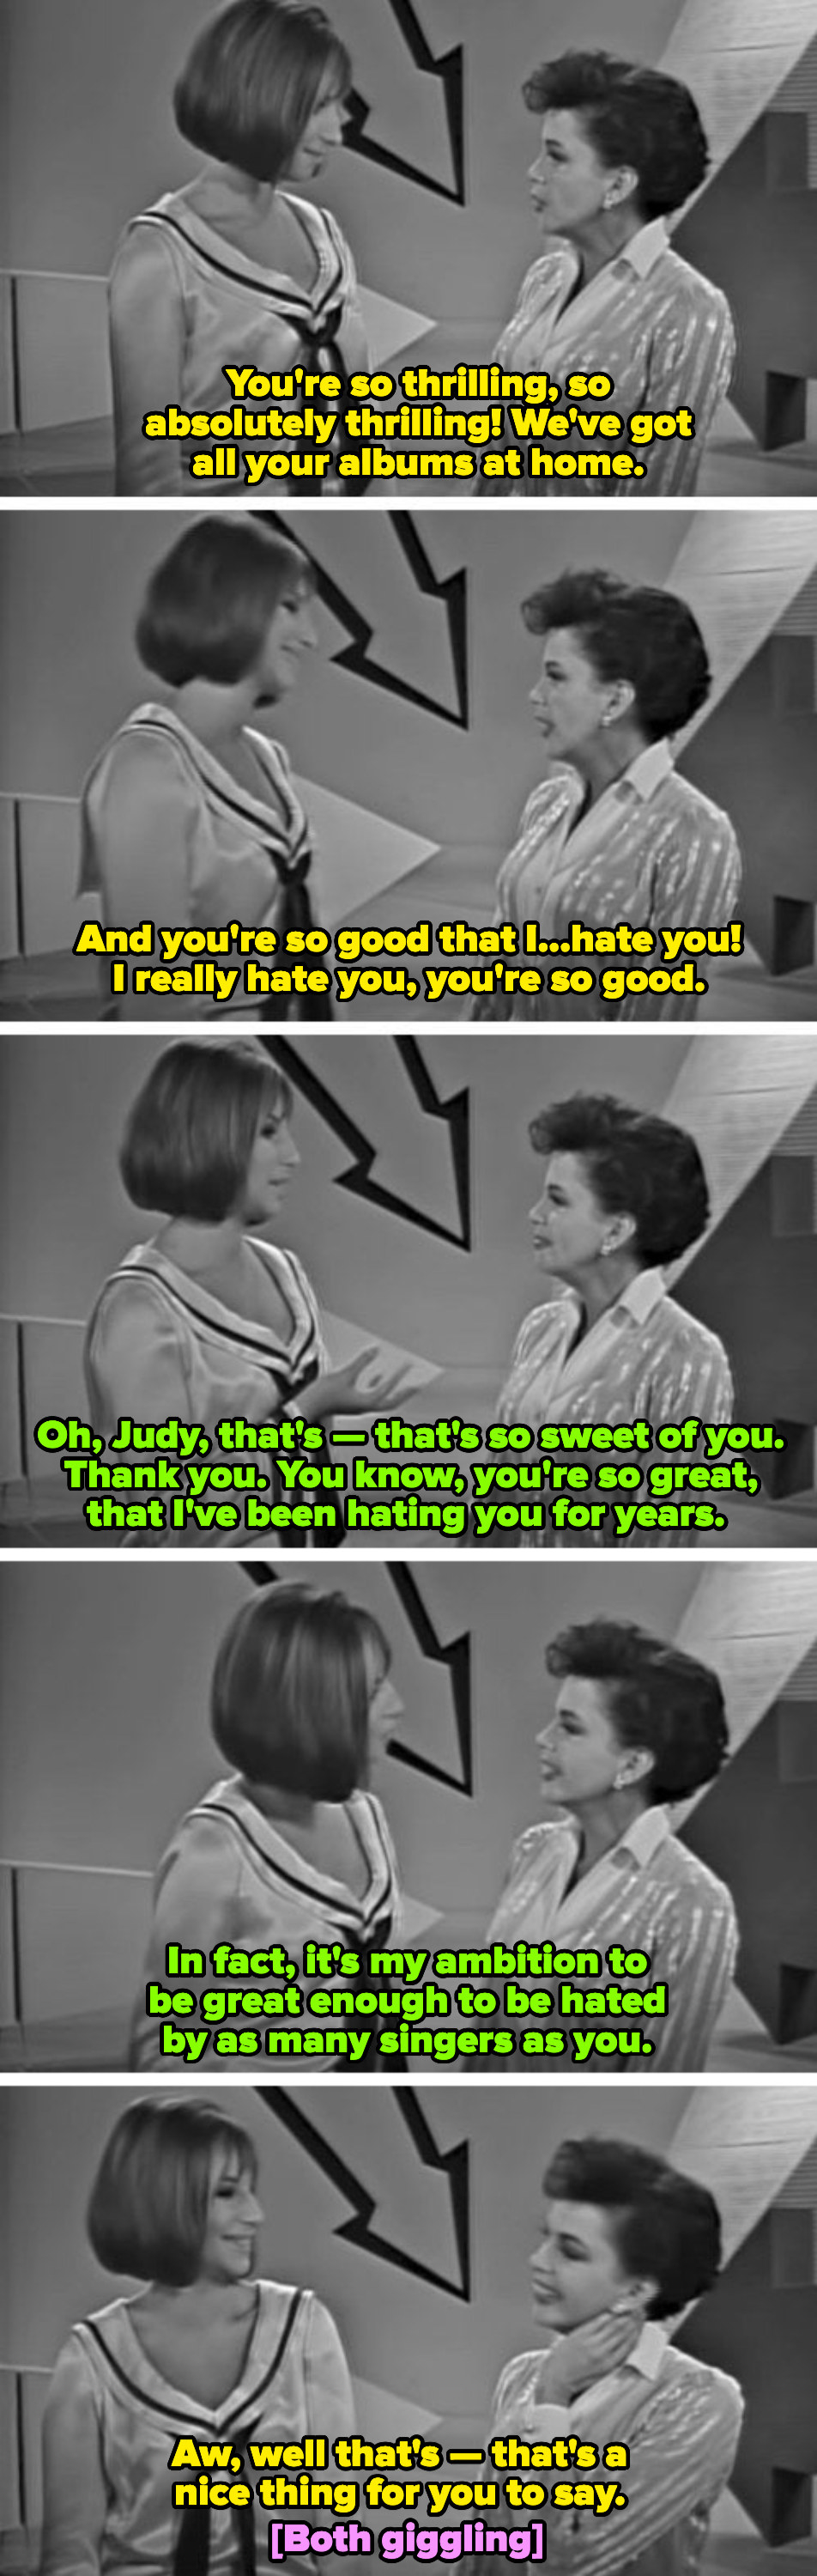 Barbra and Judy on &quot;The Judy Garland Show.&quot; Judy to Barbra: &quot;You&#x27;re so good that I...hate you! I hate you you&#x27;re so good.&quot; Barbra to Judy: &quot;You&#x27;re so great, that I&#x27;ve been hating you for years&quot;